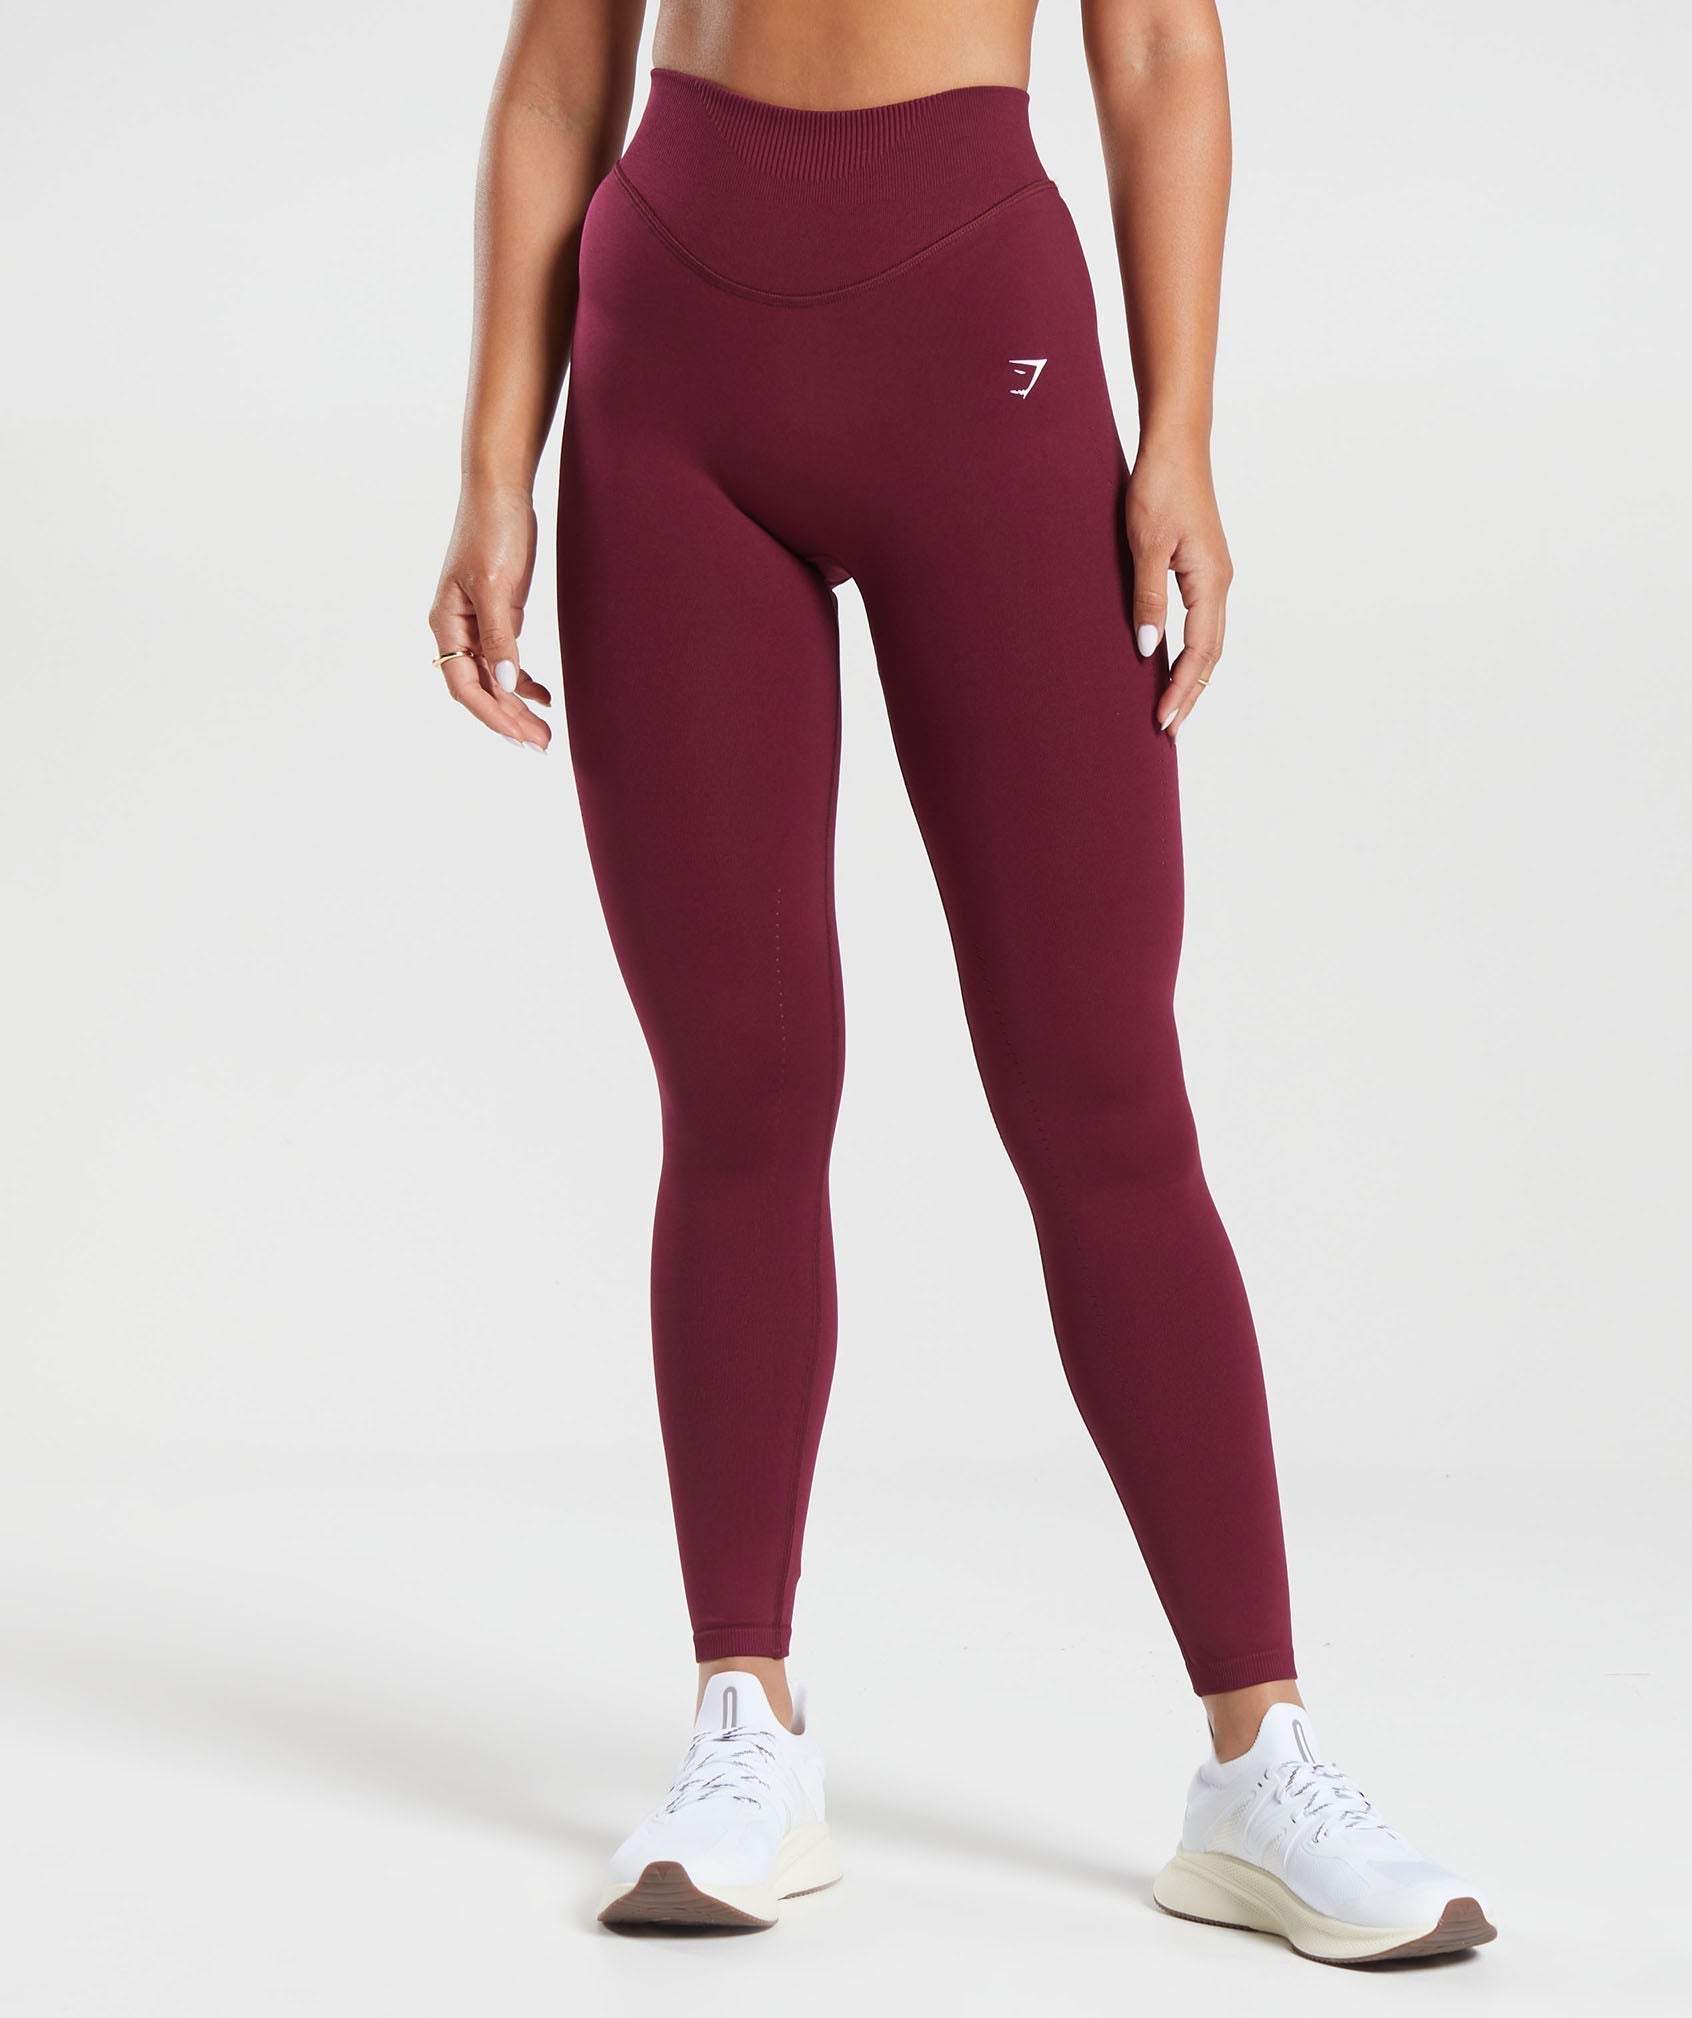 Gymshark Apex Seamless High Waisted Body Mapping Leggings – Sports Next Day